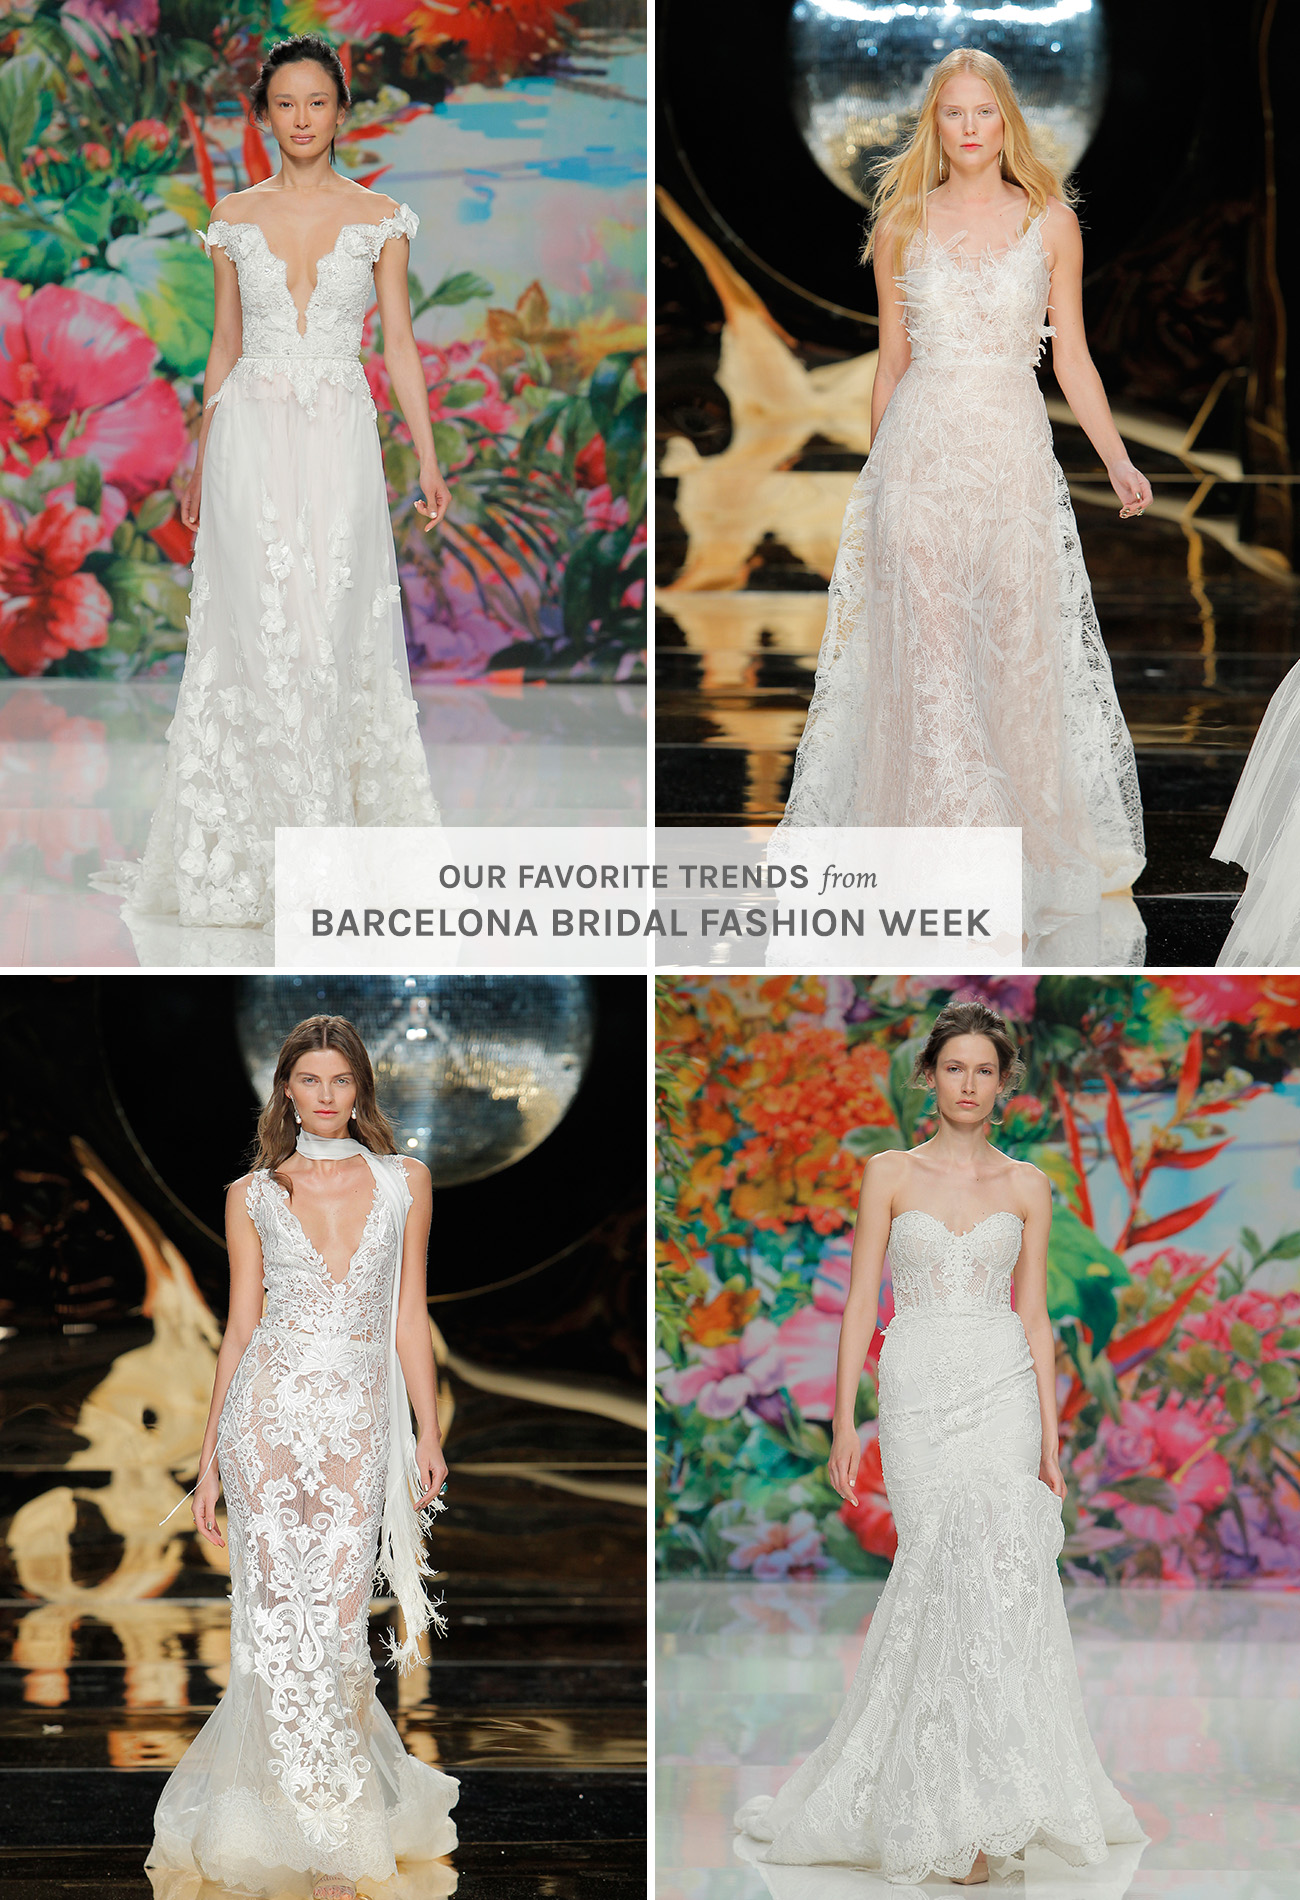 Our Favorite Trends from Barcelona Bridal Fashion Week